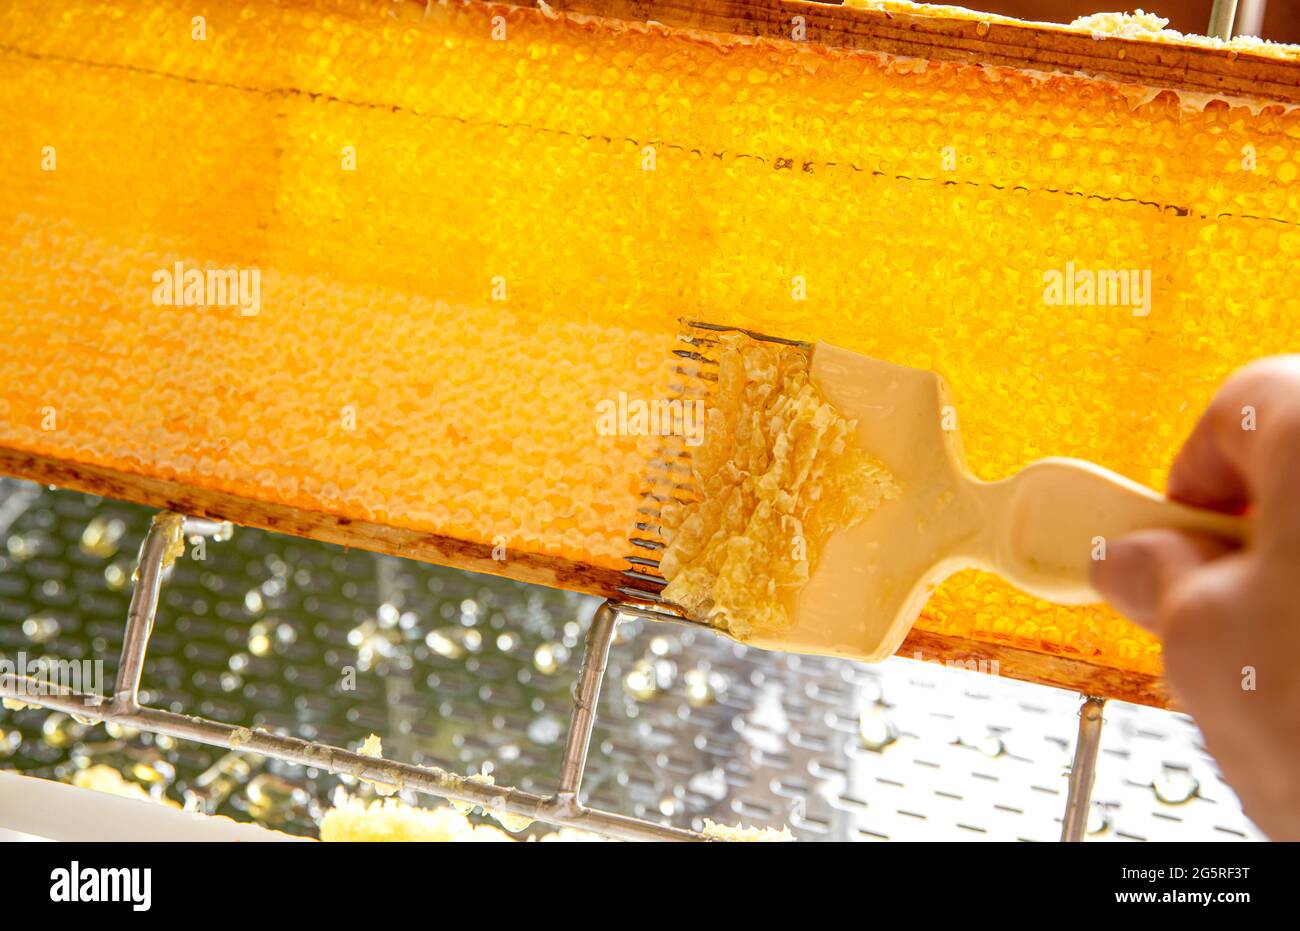 Detail view of hobby beekeeper extracting honey from honeycomb, uncapping with fork. Wooden honeybee frame on uncapping rack tray. Stock Photo